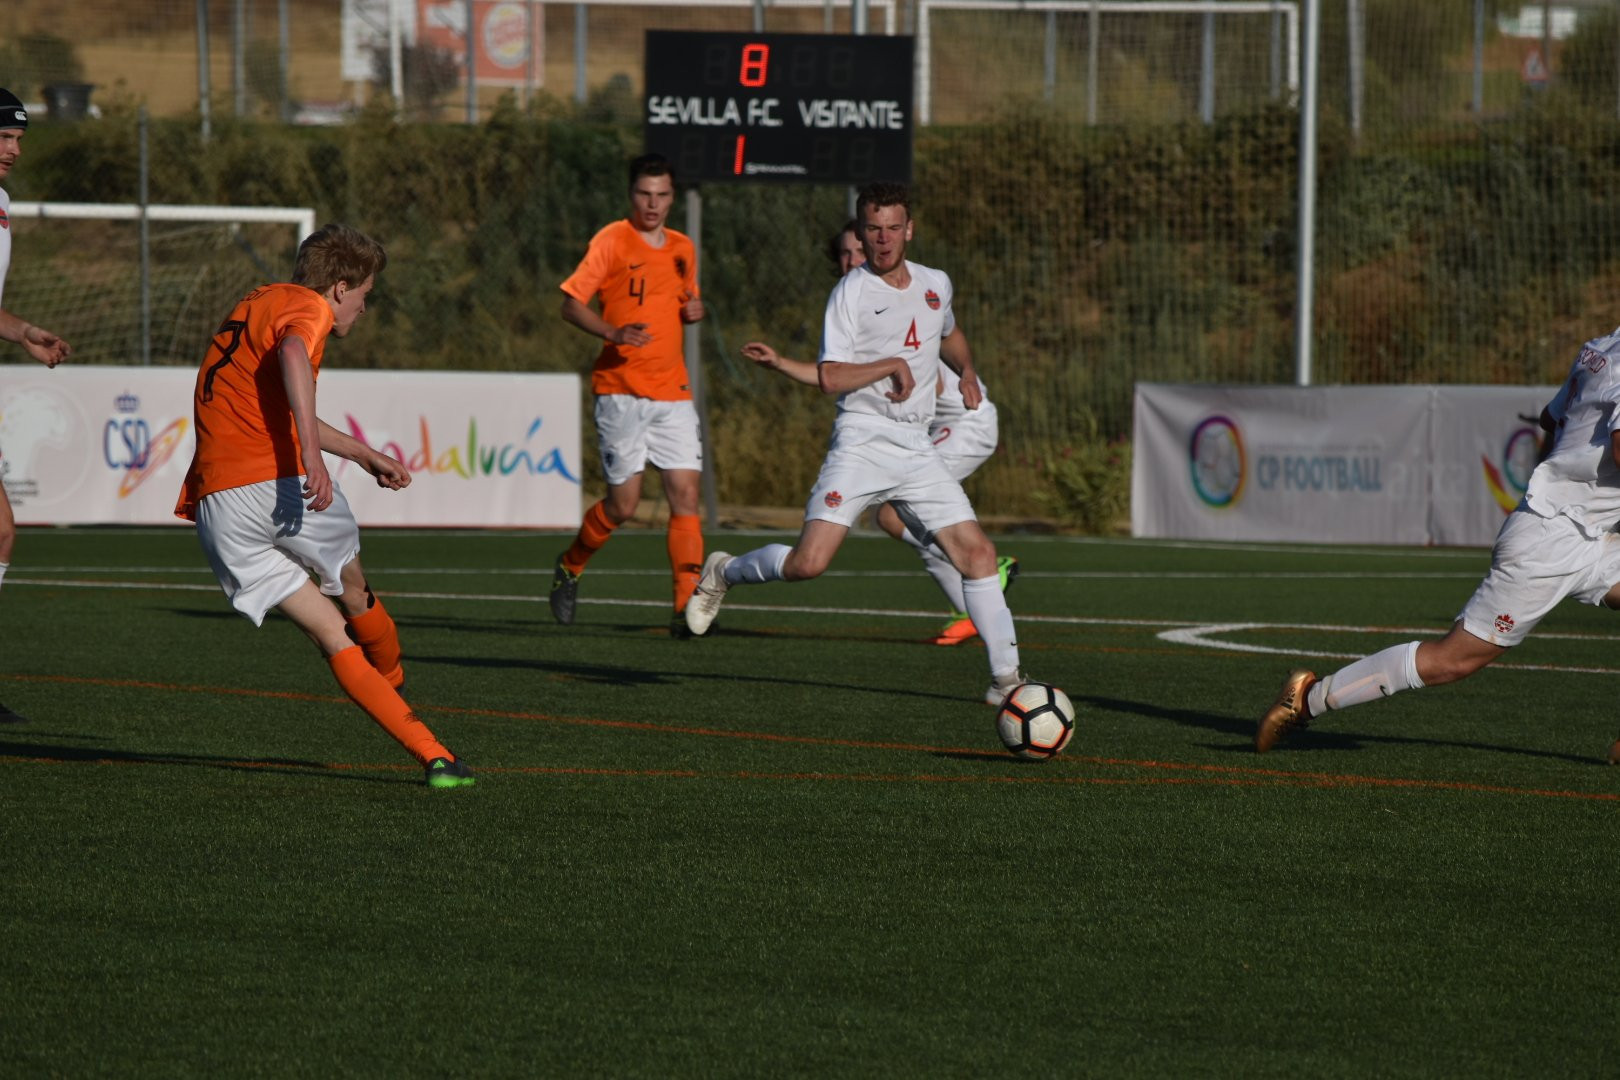 Netherlands open IFCPF World Cup campaign with win over Canada